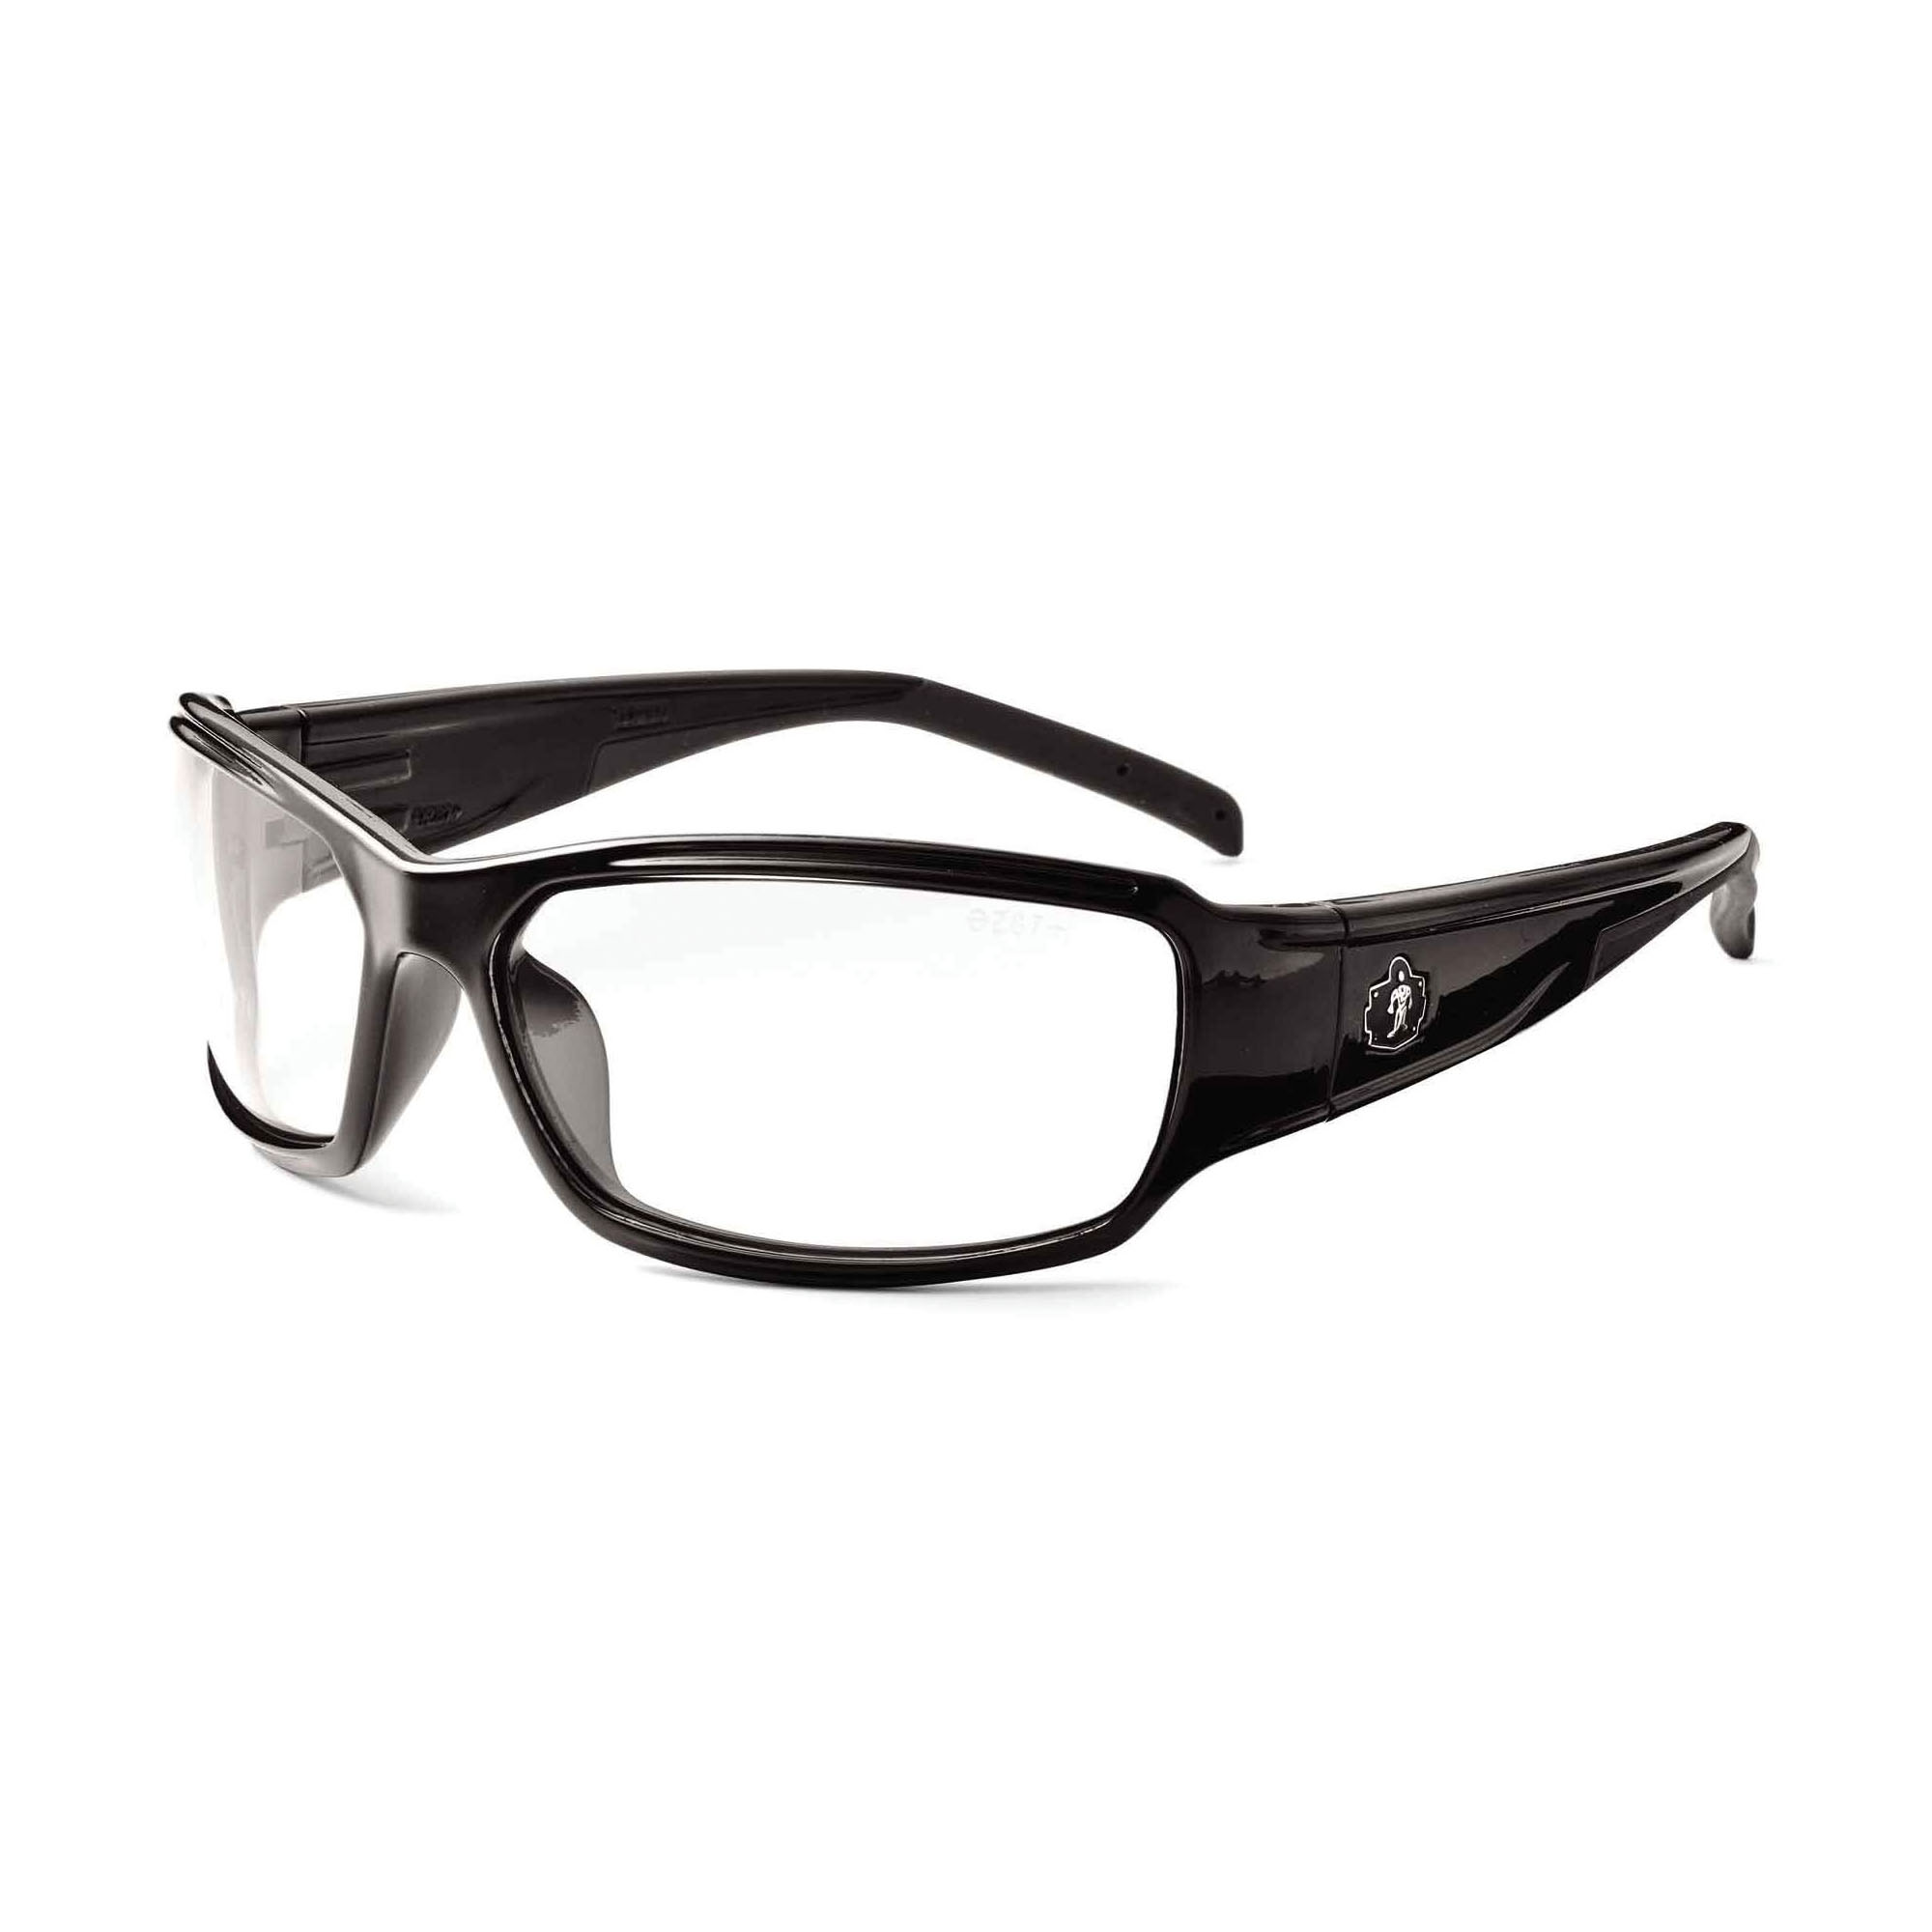 THOR CLR SAFETY GLASSES